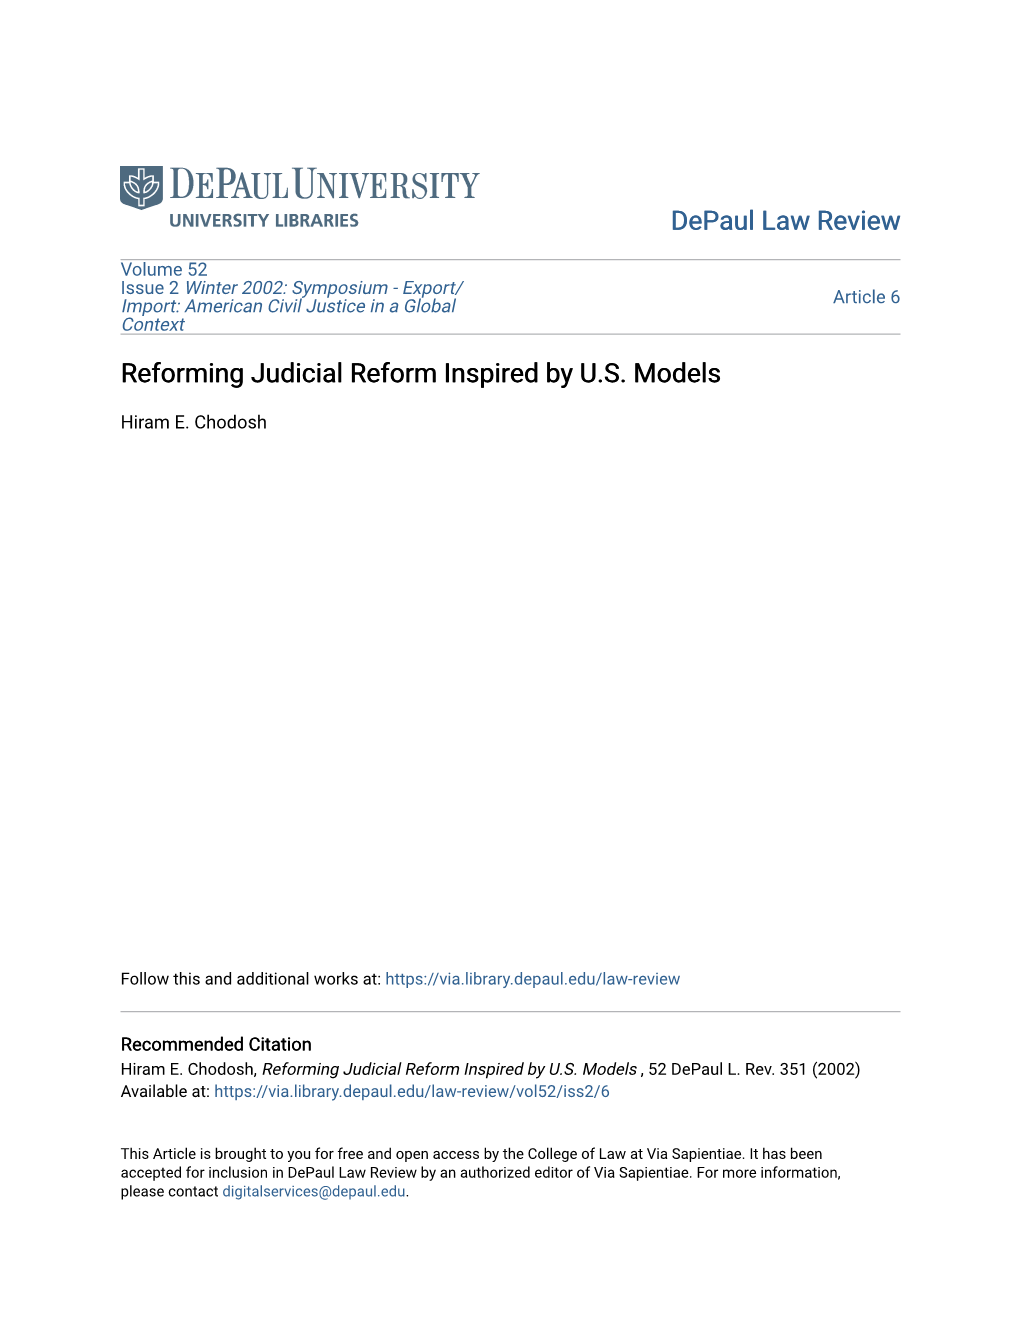 Reforming Judicial Reform Inspired by U.S. Models